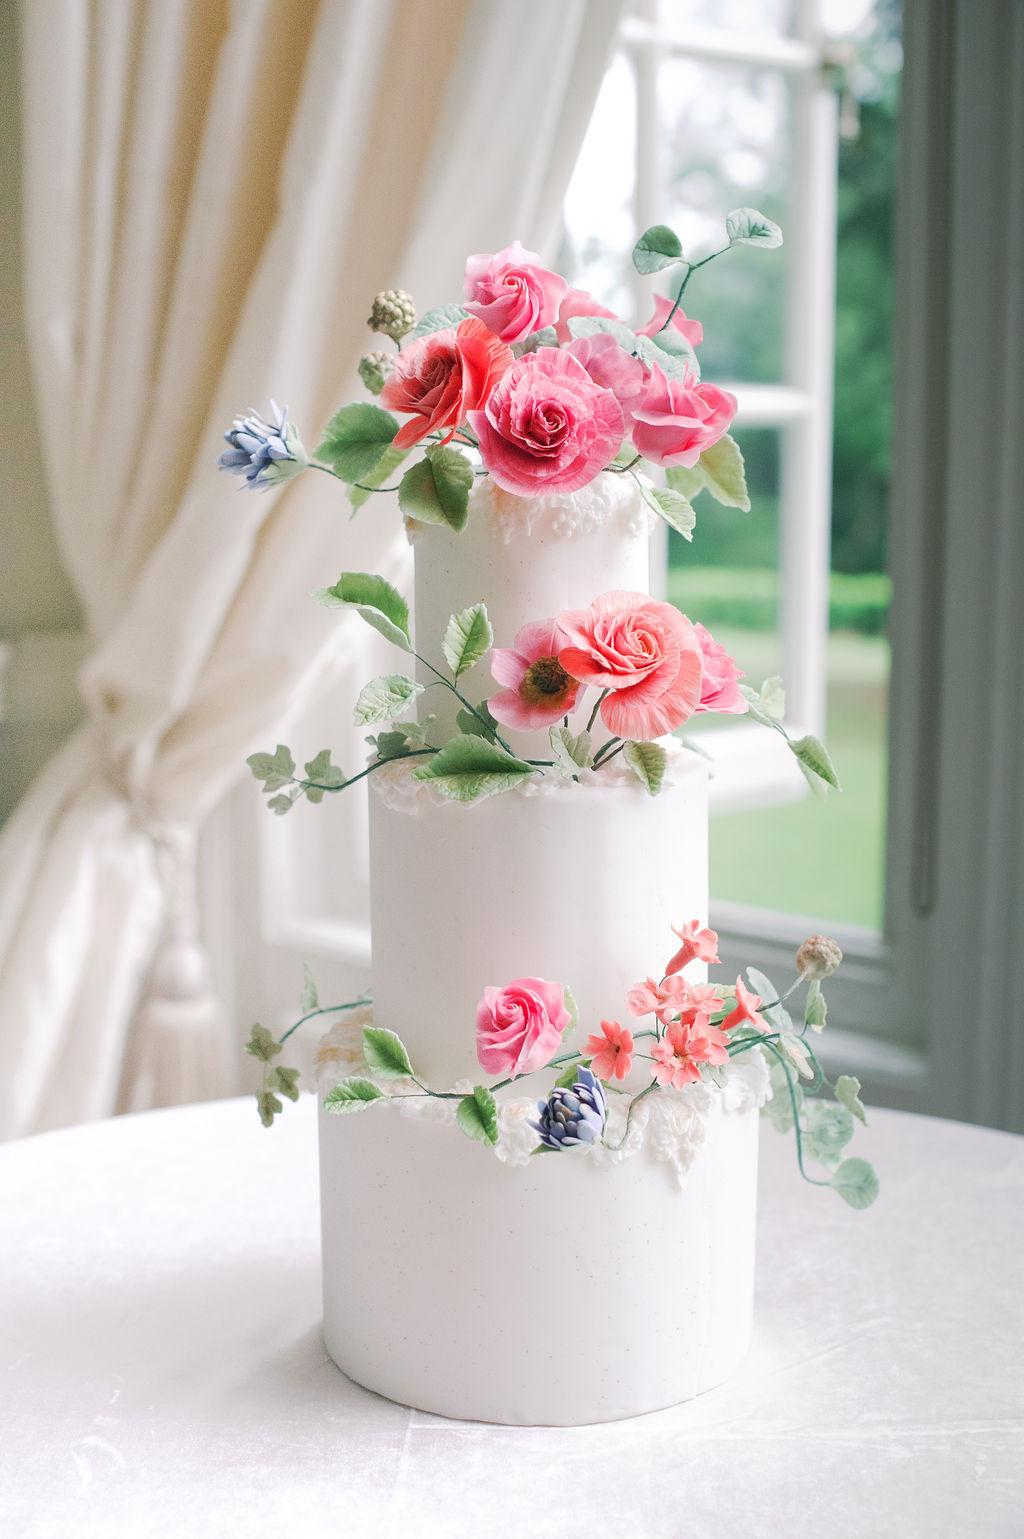 three tiered wedding cake with colorful 3D sugar flowers; photography by Julie Livingston at an English country estate Hedsor House with planning and design by Willow and Oak Events